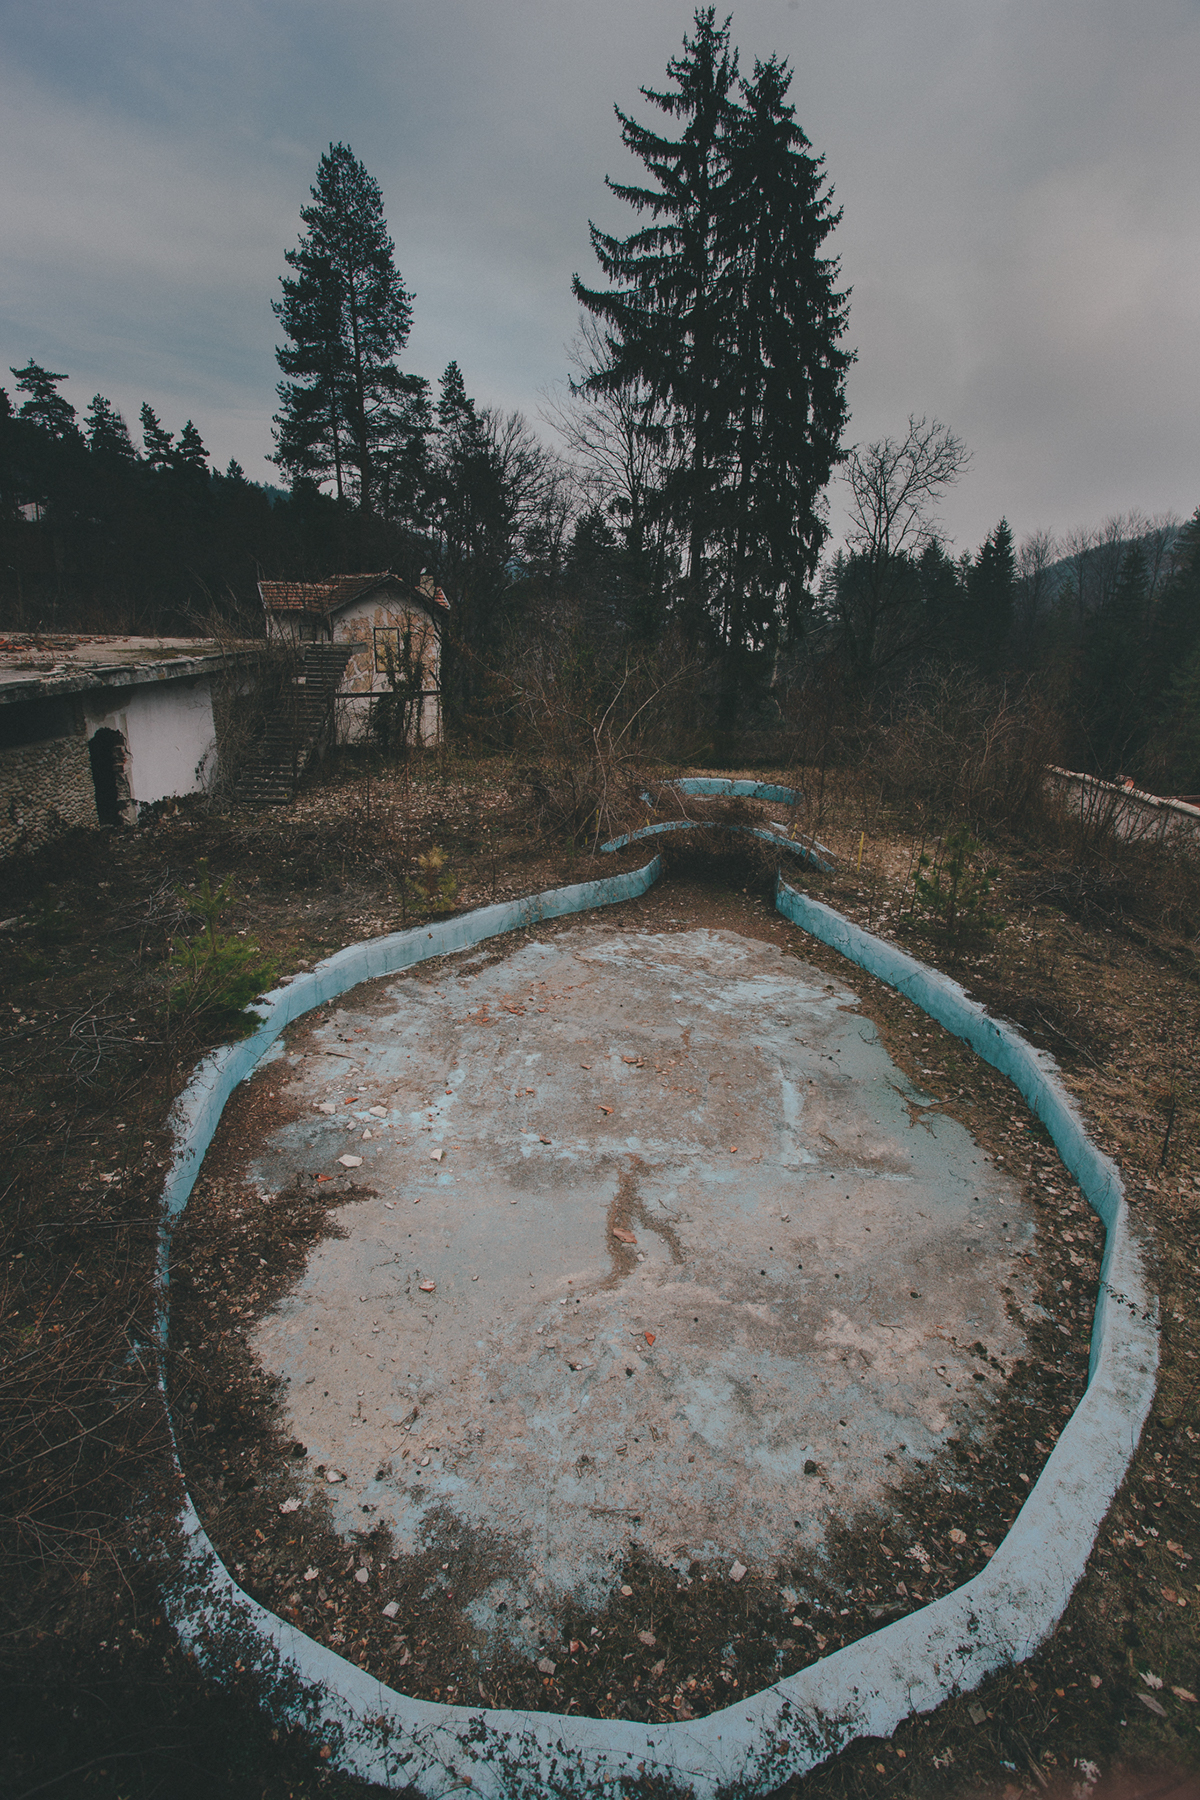 Pool abandoned bulgaria kostenets decay Nature building